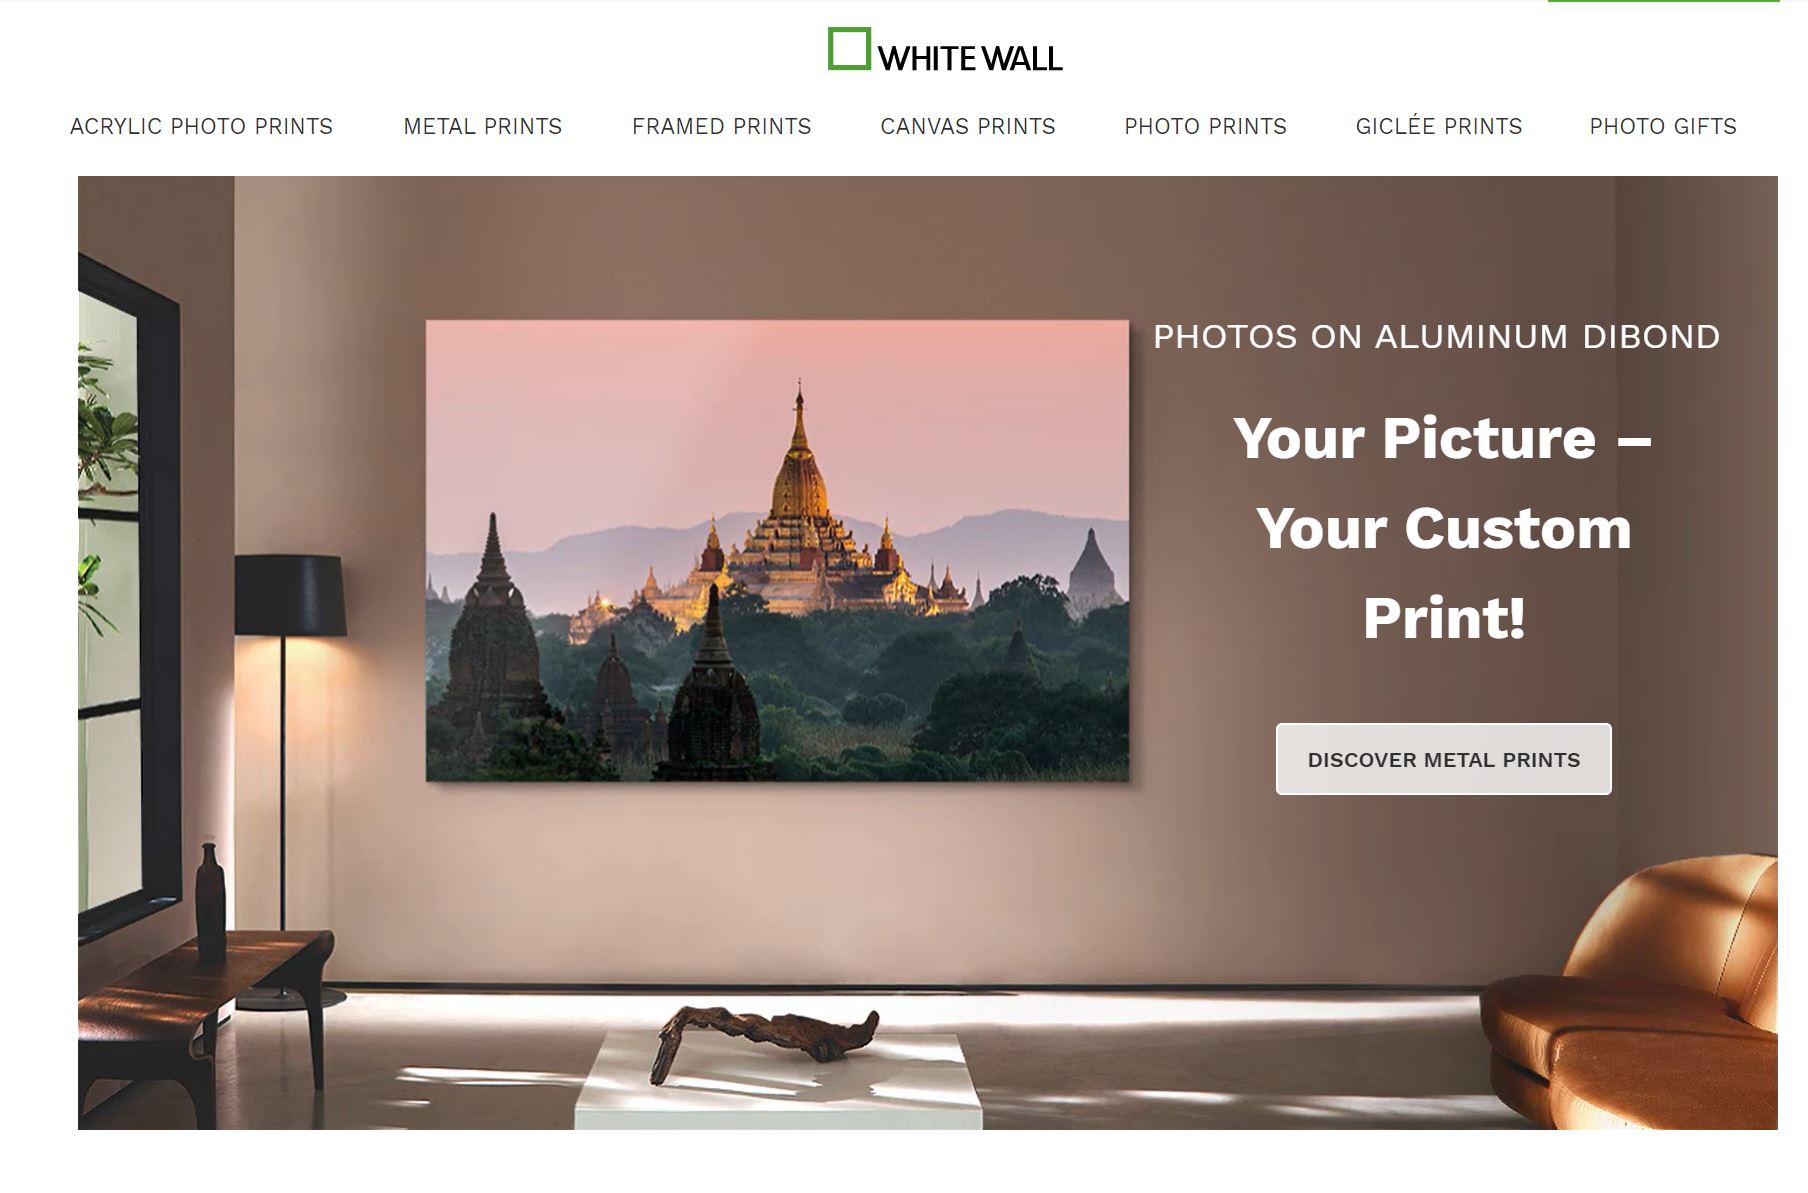 White Wall best online photo printing services homepage